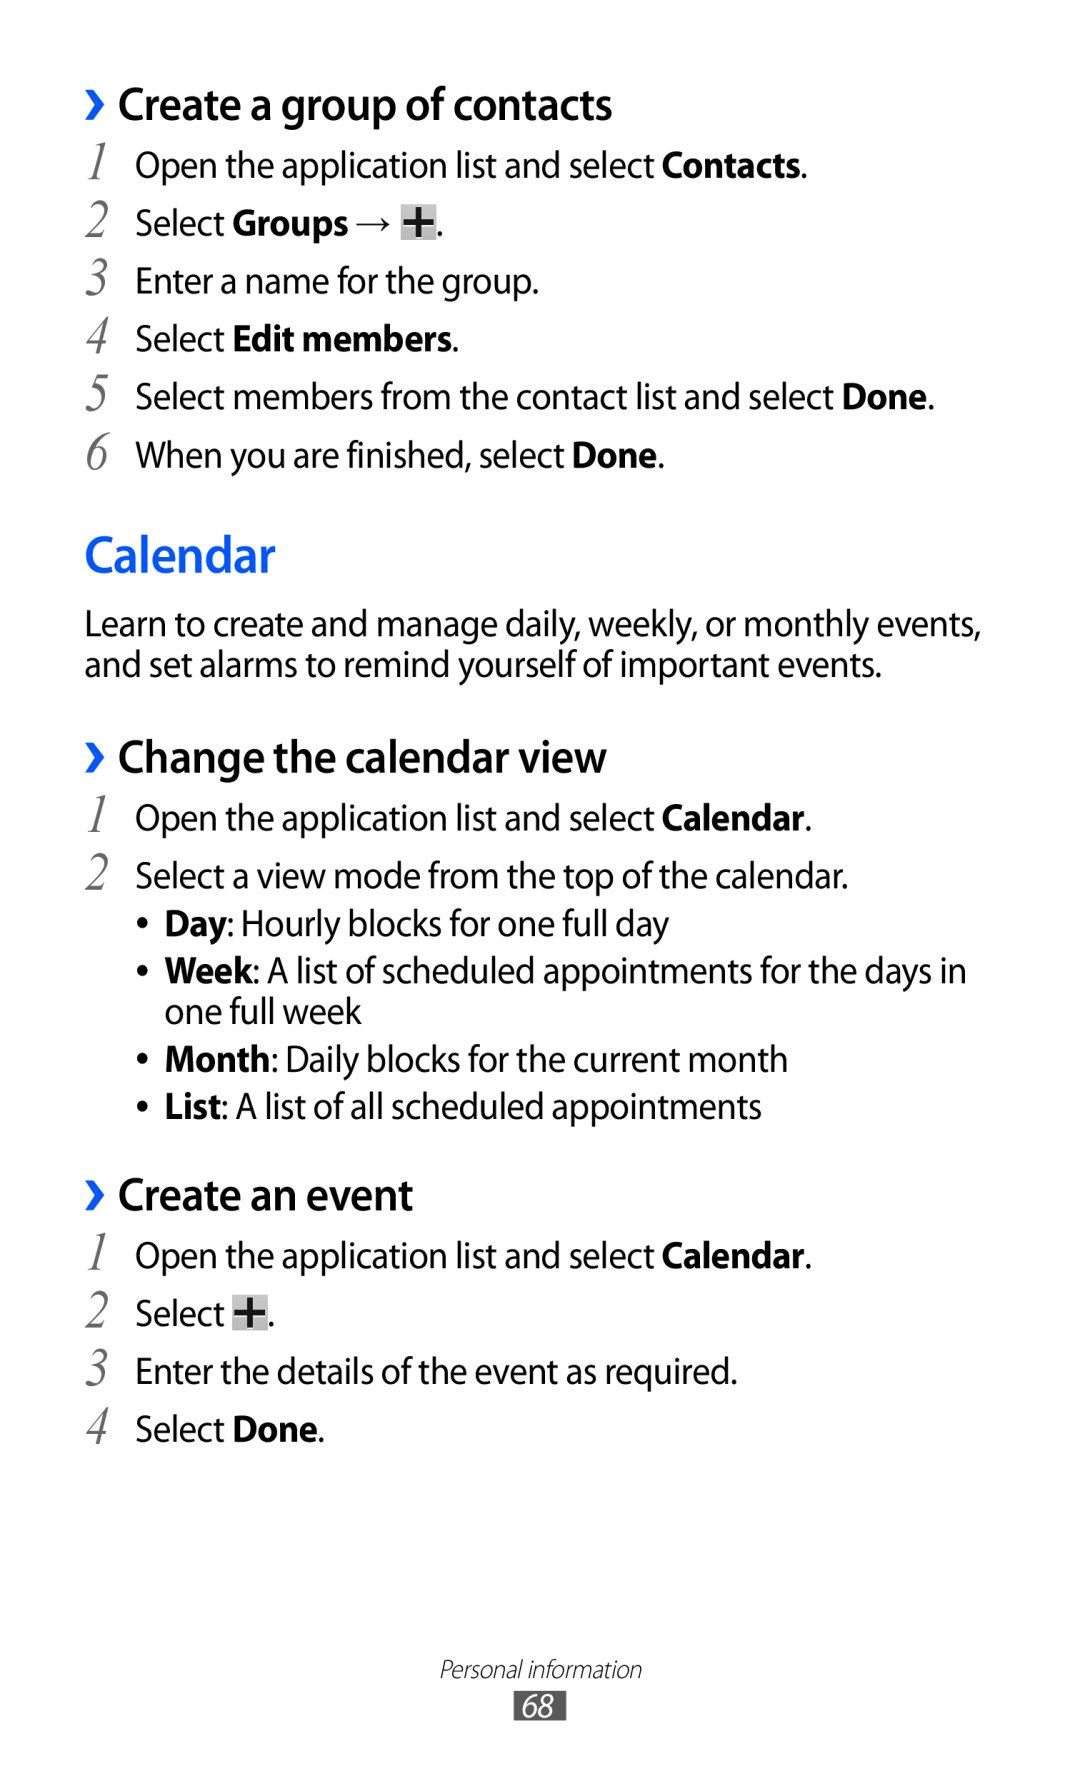 Samsung GT-P7310UWAXEF manual Calendar, ››Create a group of contacts, ››Change the calendar view, ››Create an event 